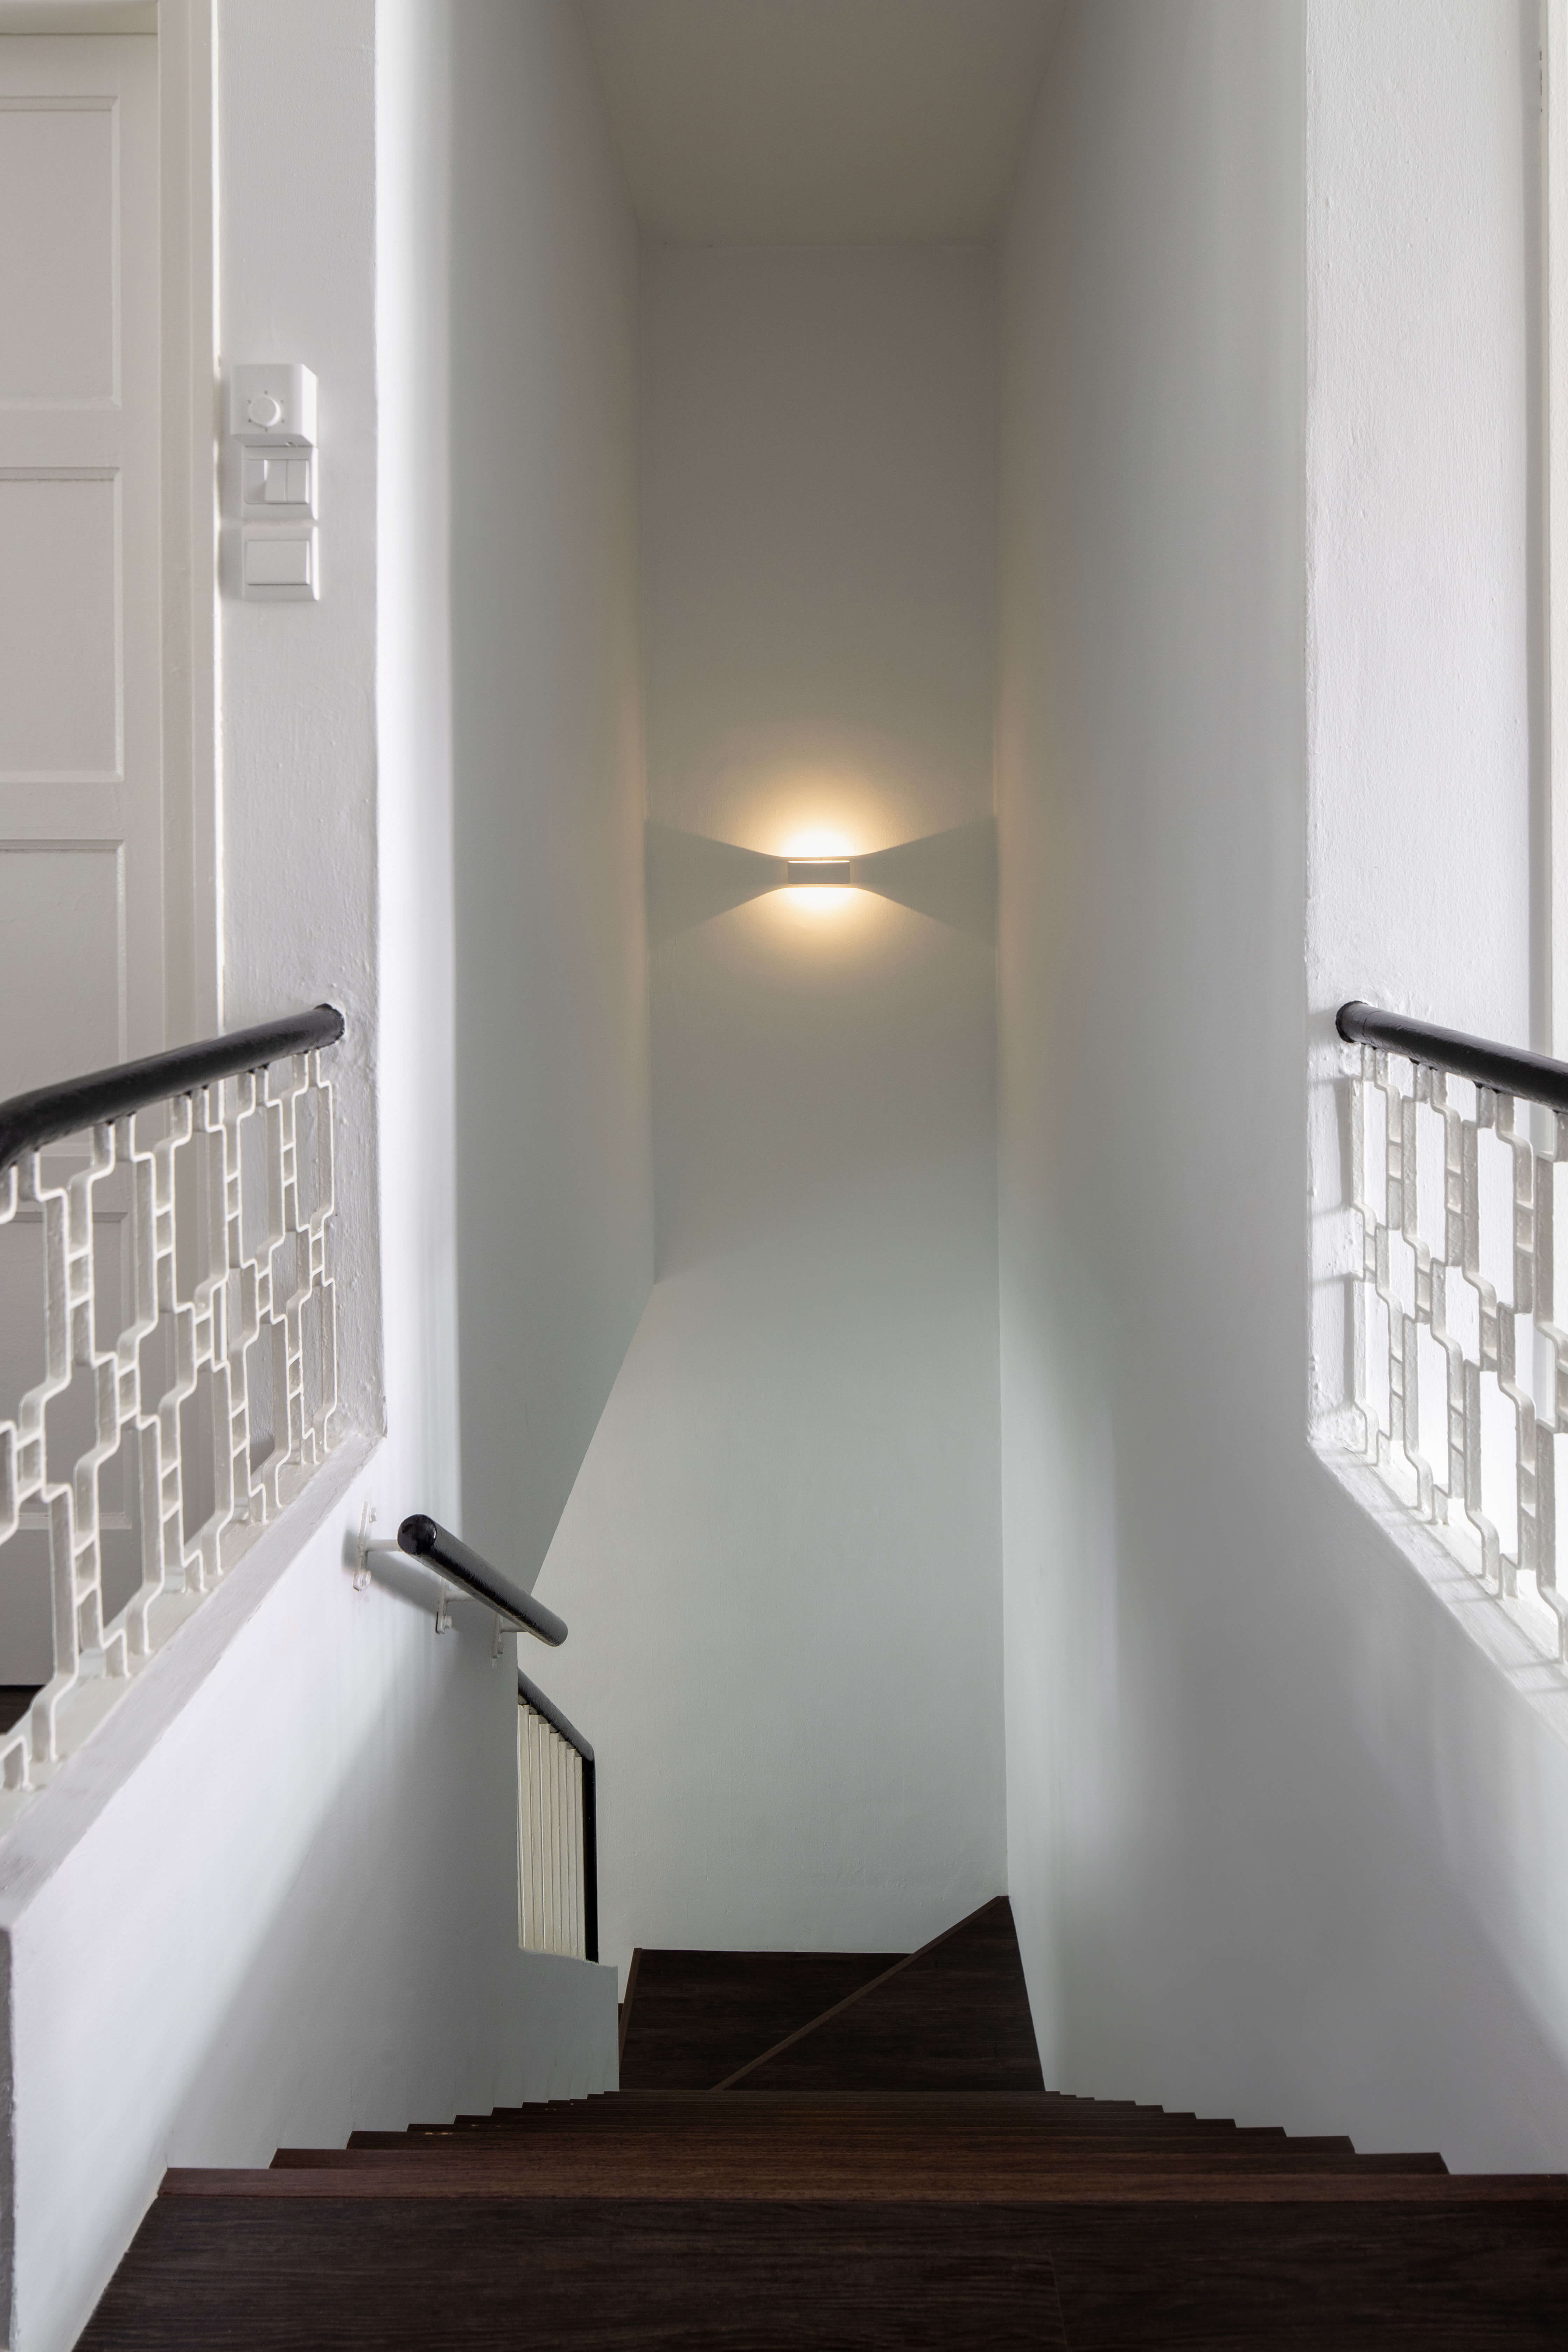 Stairway in a bungalow with decorative wrought iron balustrade and wood railing, illuminated by a warm wall sconce light casting a soft glow in a narrow hallway.